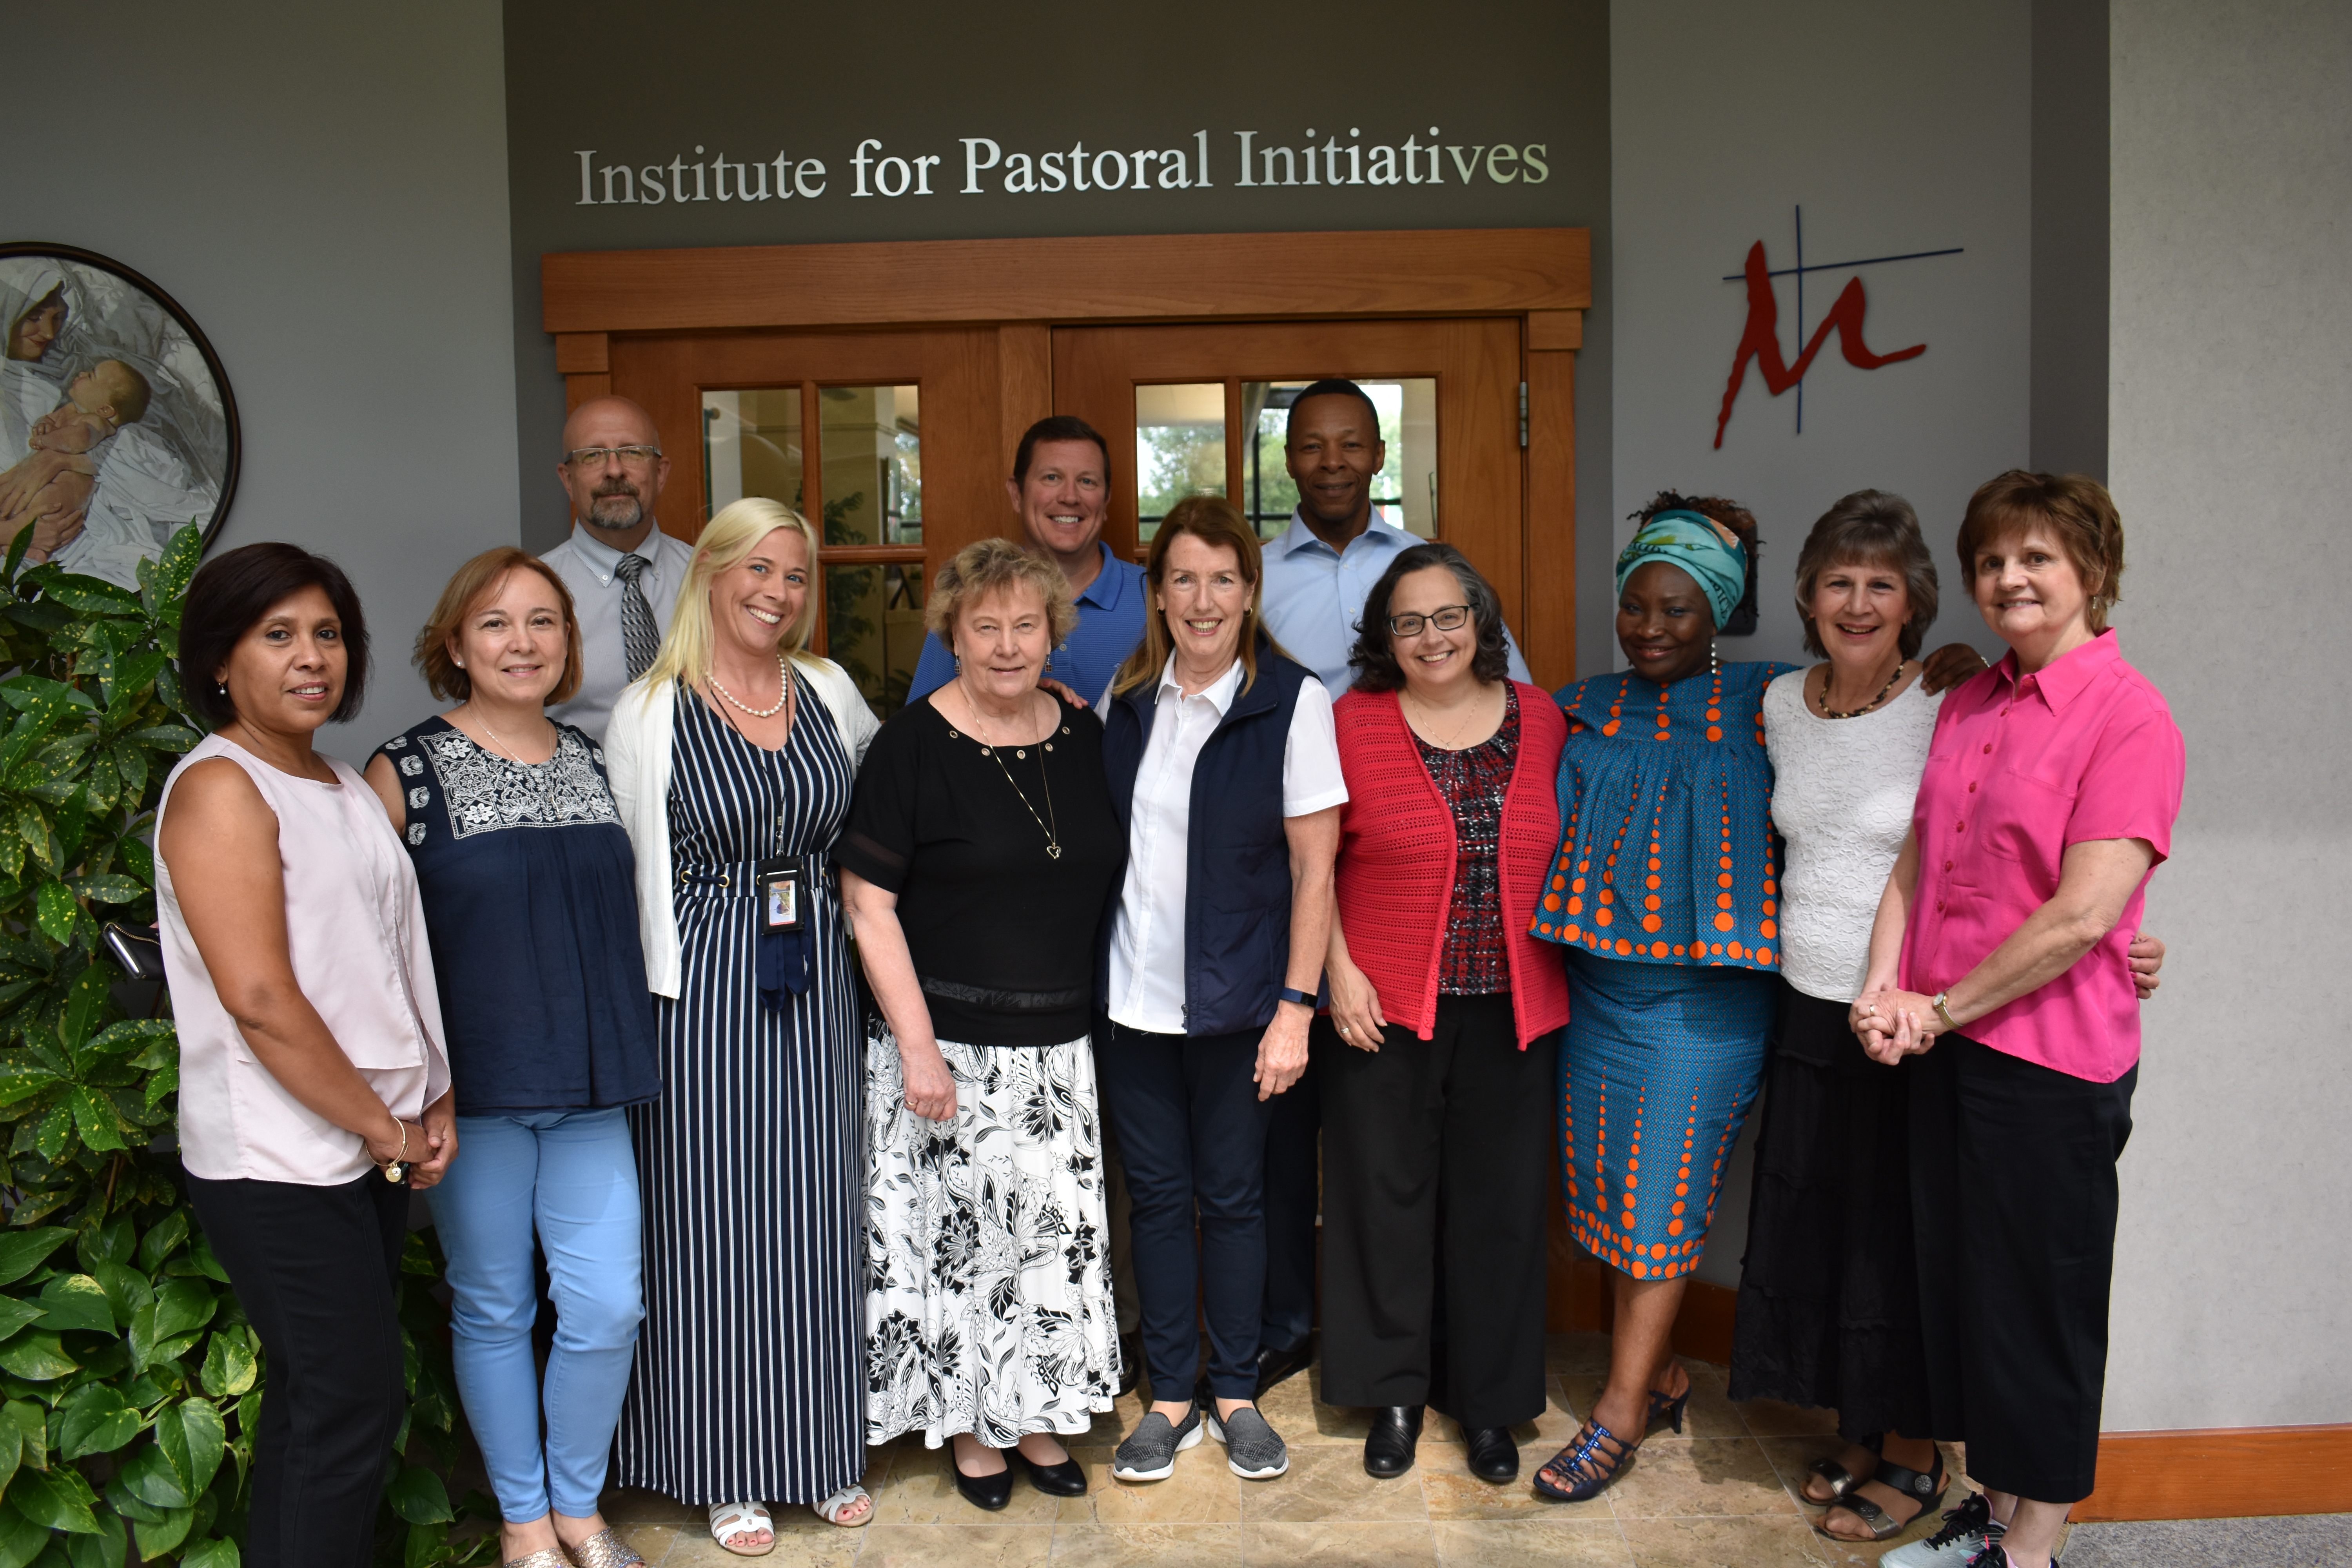 The Institute for Pastoral Initiatives staff will help you with your online learning journey. The IPI office is located at Dan Curran Place.